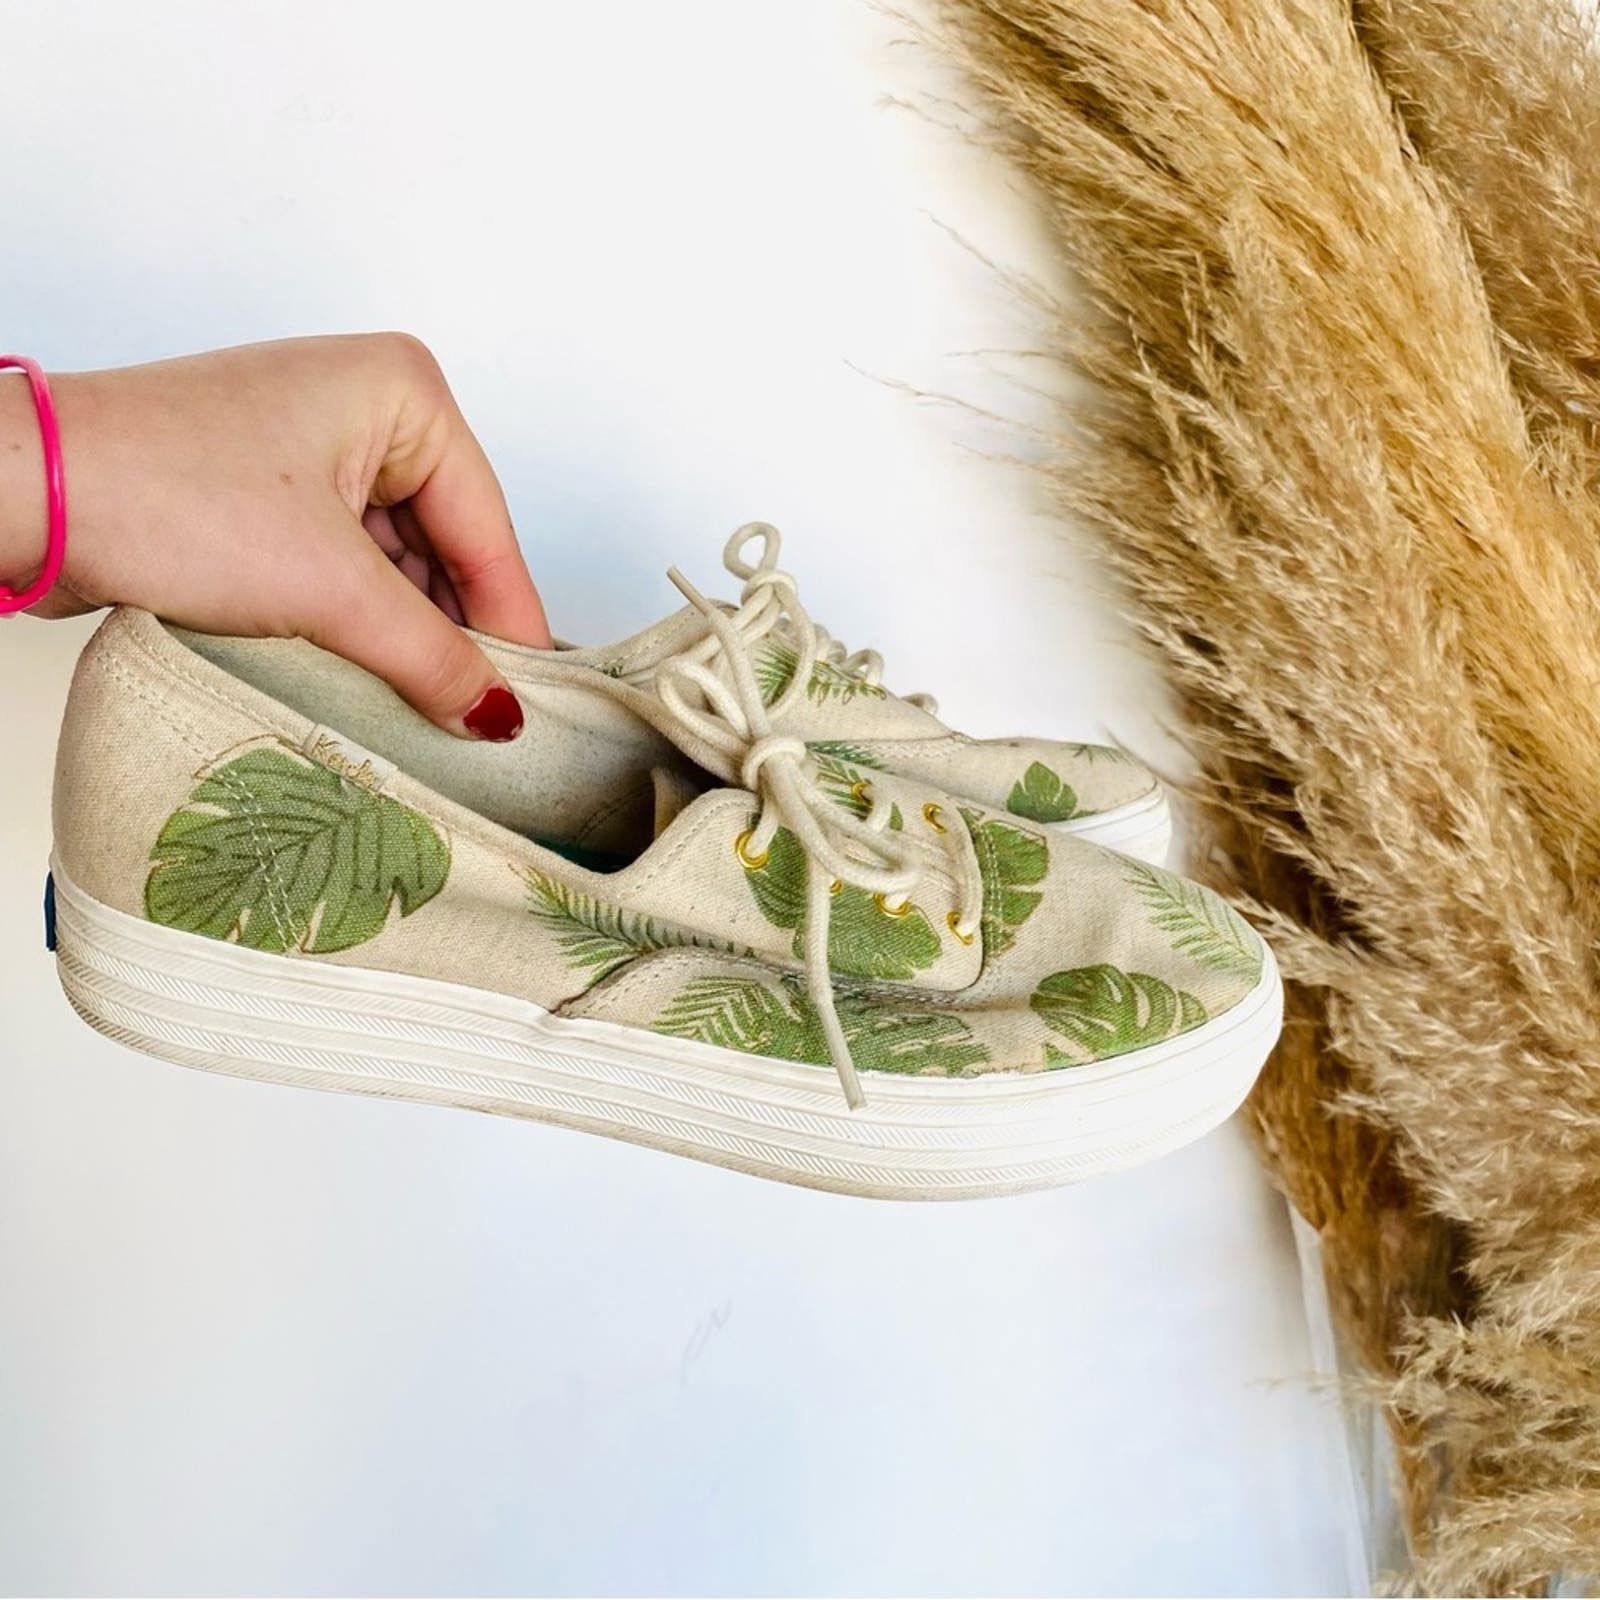 Anthropologie ANTHROPOLOGIE KEDS Cream Green Palm Leaf Platform Sneakers Size US 8.5 / IT 38.5 - 2 Preview